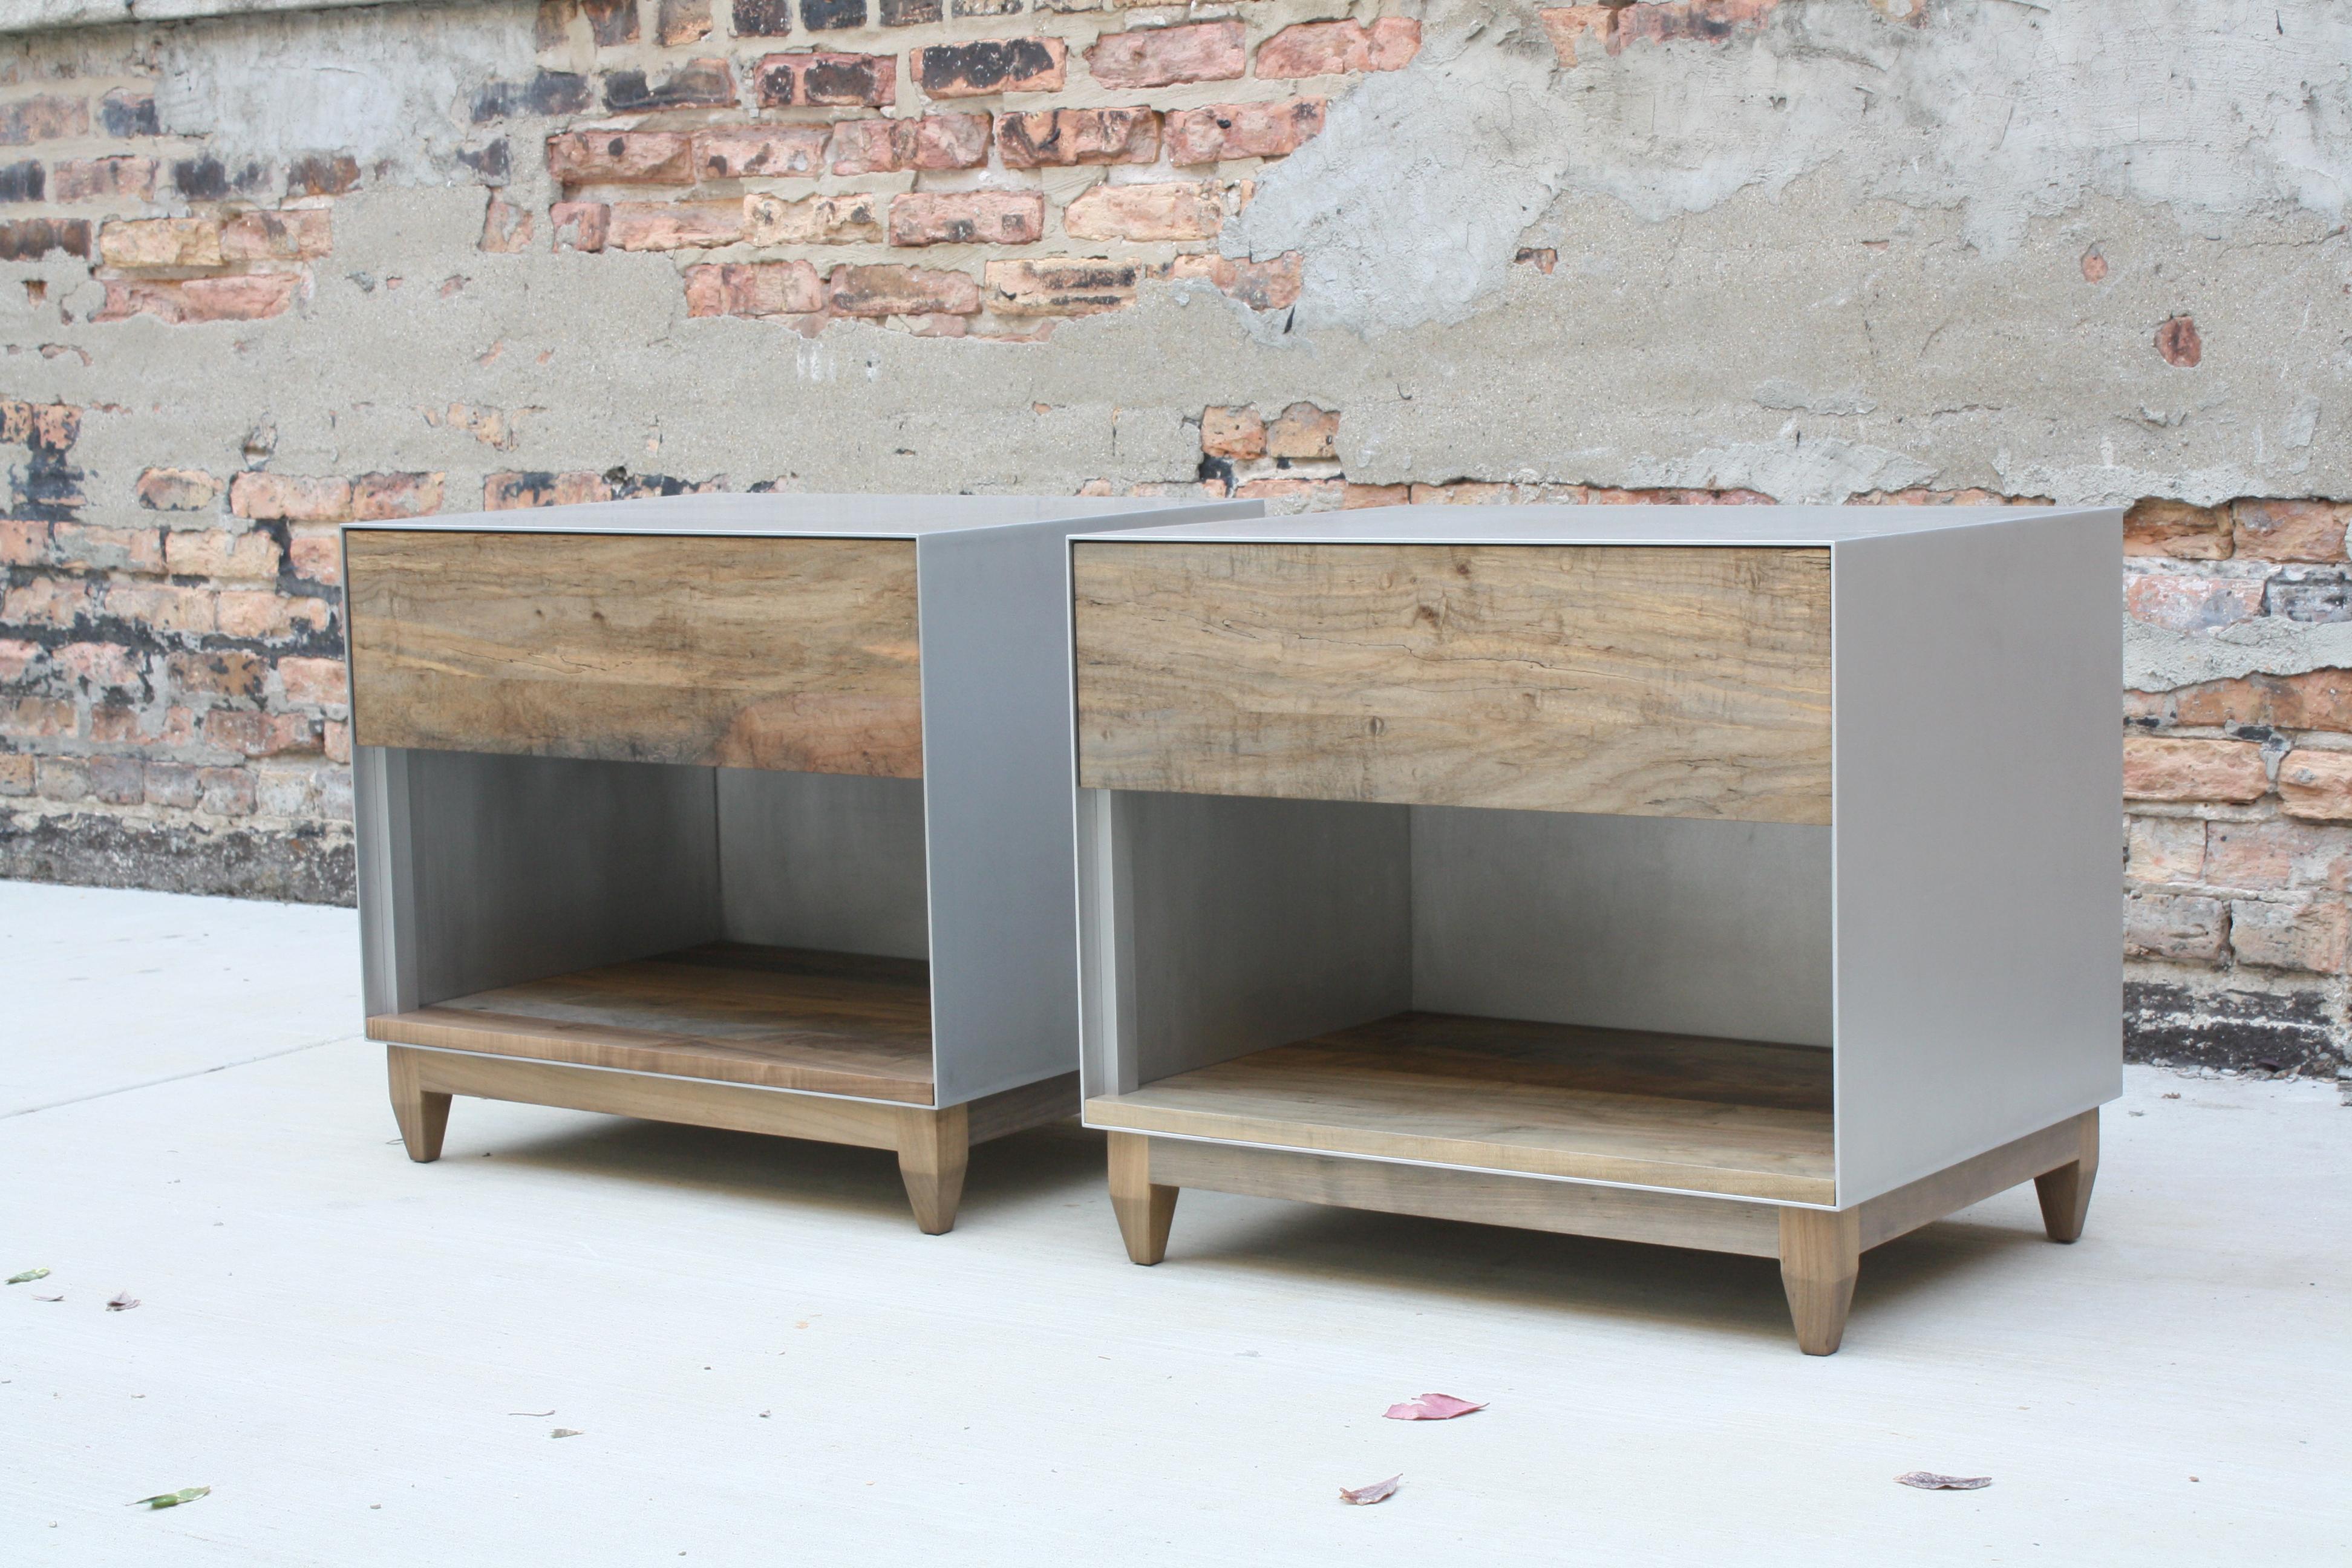 Handmade in Chicago by Laylo Studio, this customizable nightstand or end table features a waxed aluminum case and a solid wood interior, drawer front and base. The seamless metal case has a minimal front edge that frames a solid wood drawer front